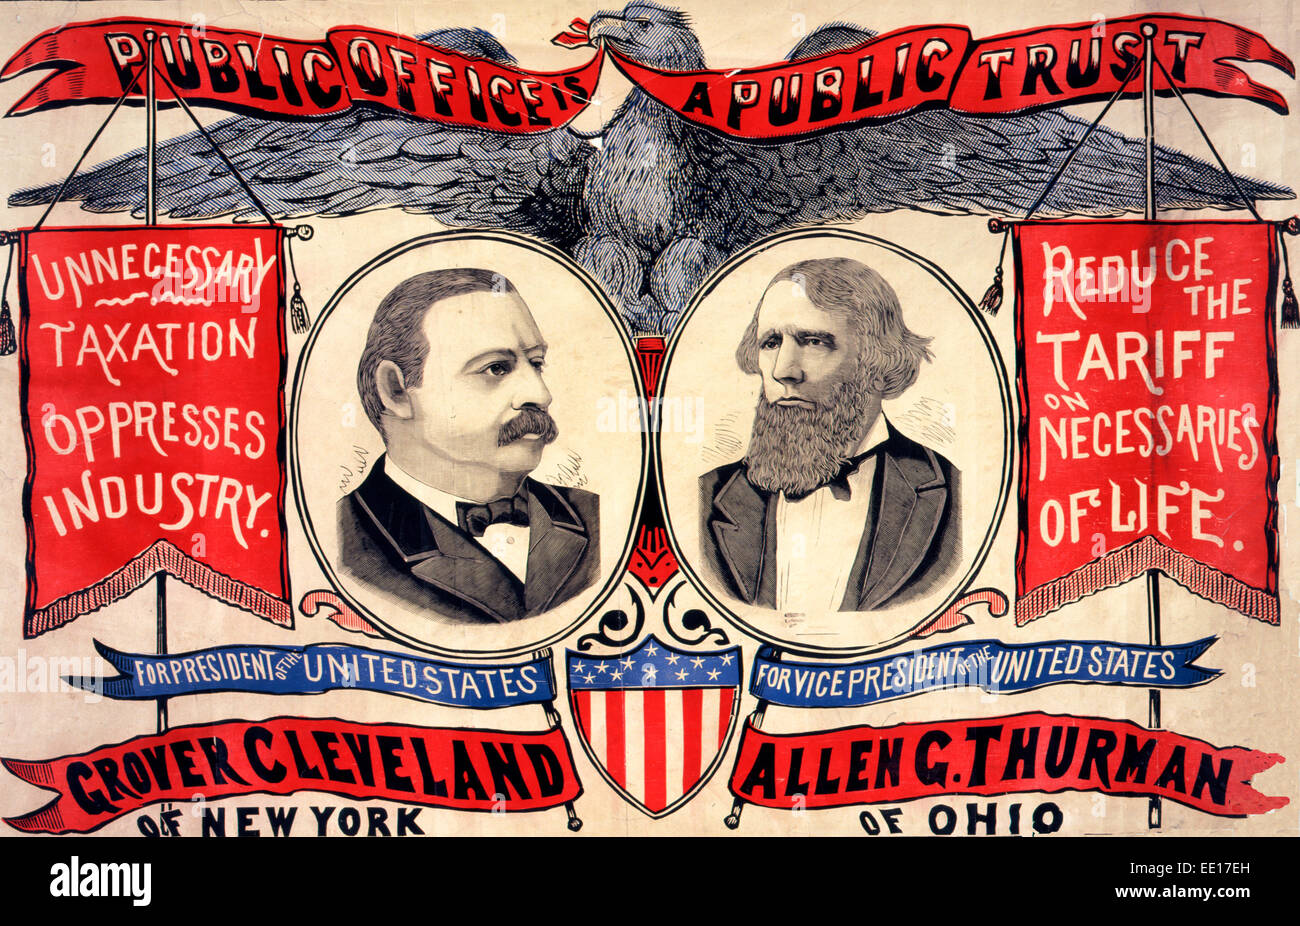 Public office is a public trust For President of the United States, Grover Cleveland of New York ; For Vice-President of the United States, Allen G. Thurman of Ohio.  Summary: Political poster shows vignettes of the candidates, banners with campaign slogans, and an eagle.  1888 Stock Photo